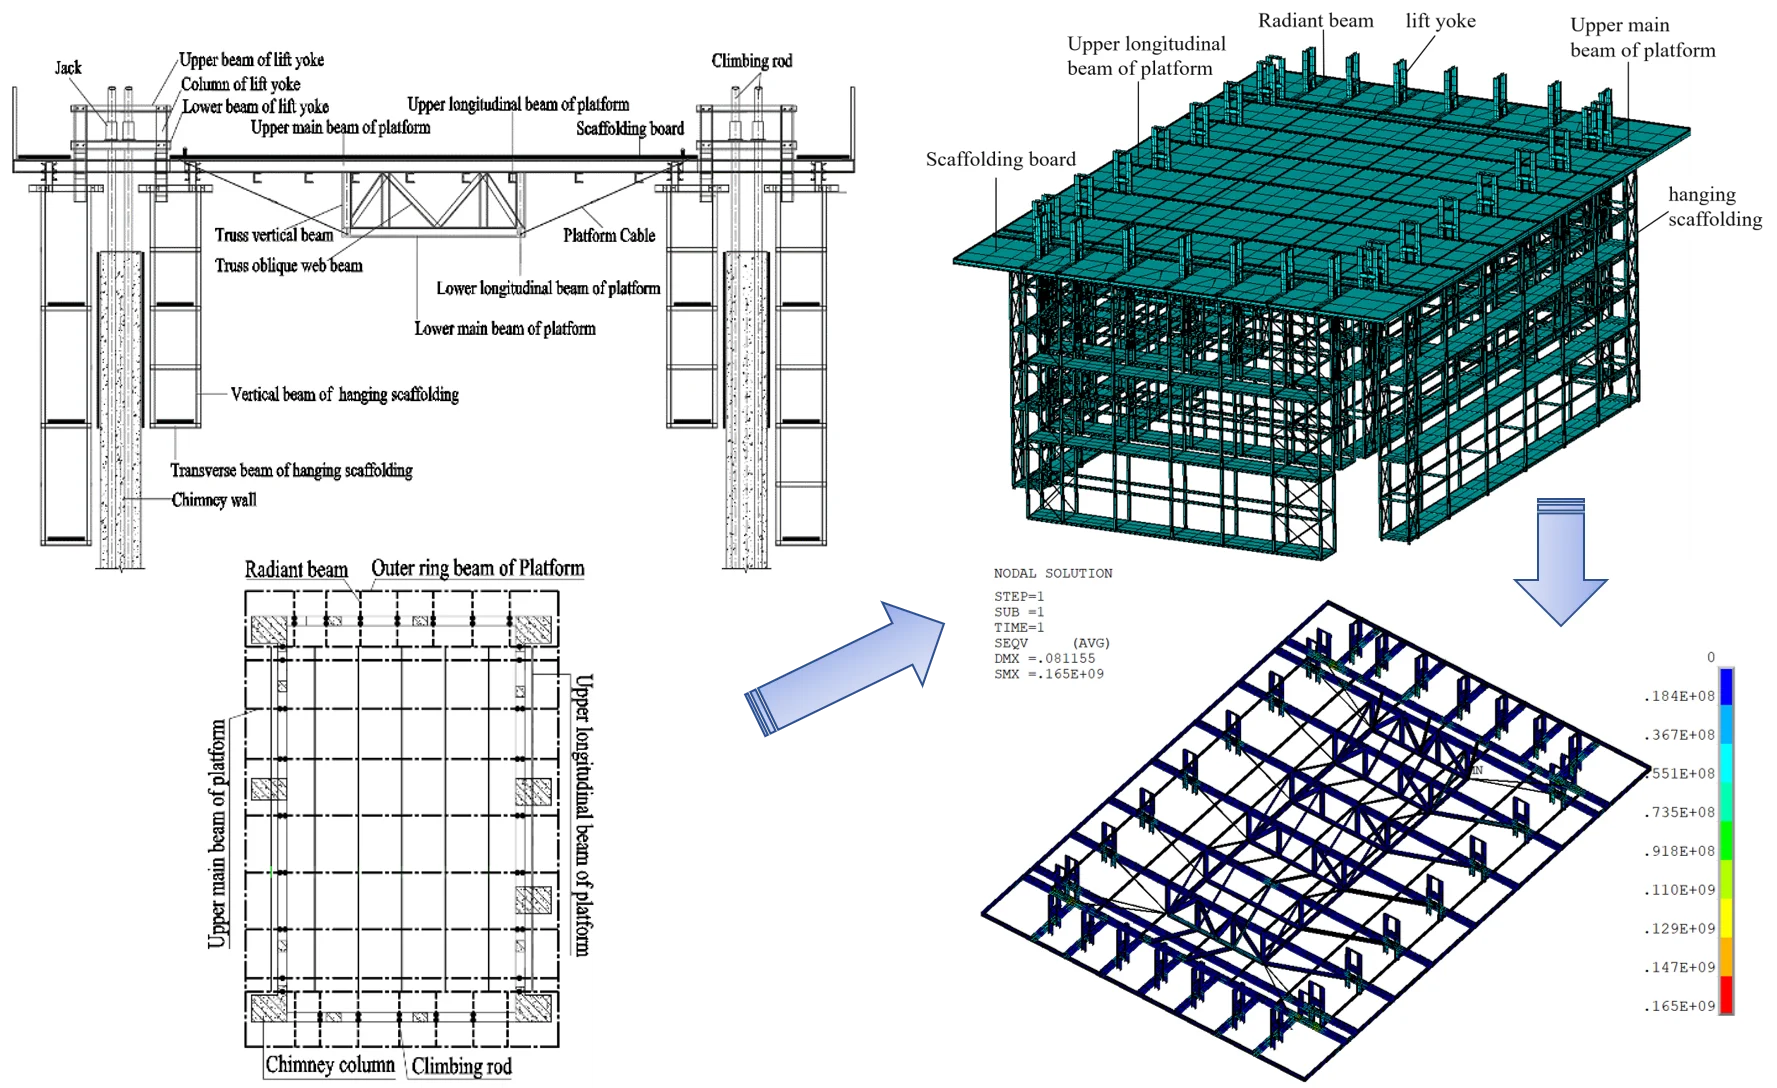 Design and mechanical analysis of hydraulic incremental slipforming platform with sliding frame